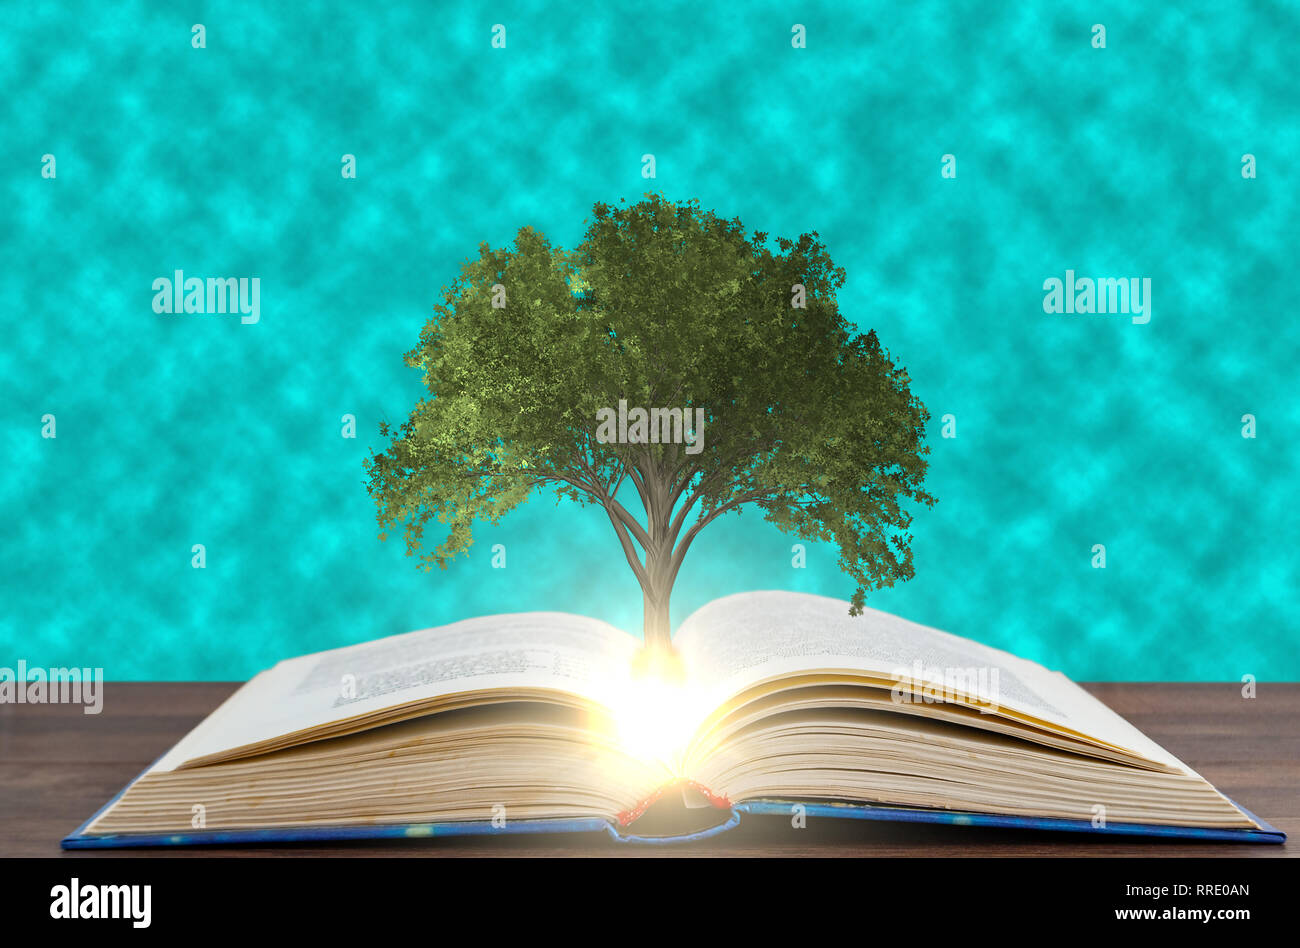 tree growing with a book on the background of the water in the pool Stock Photo